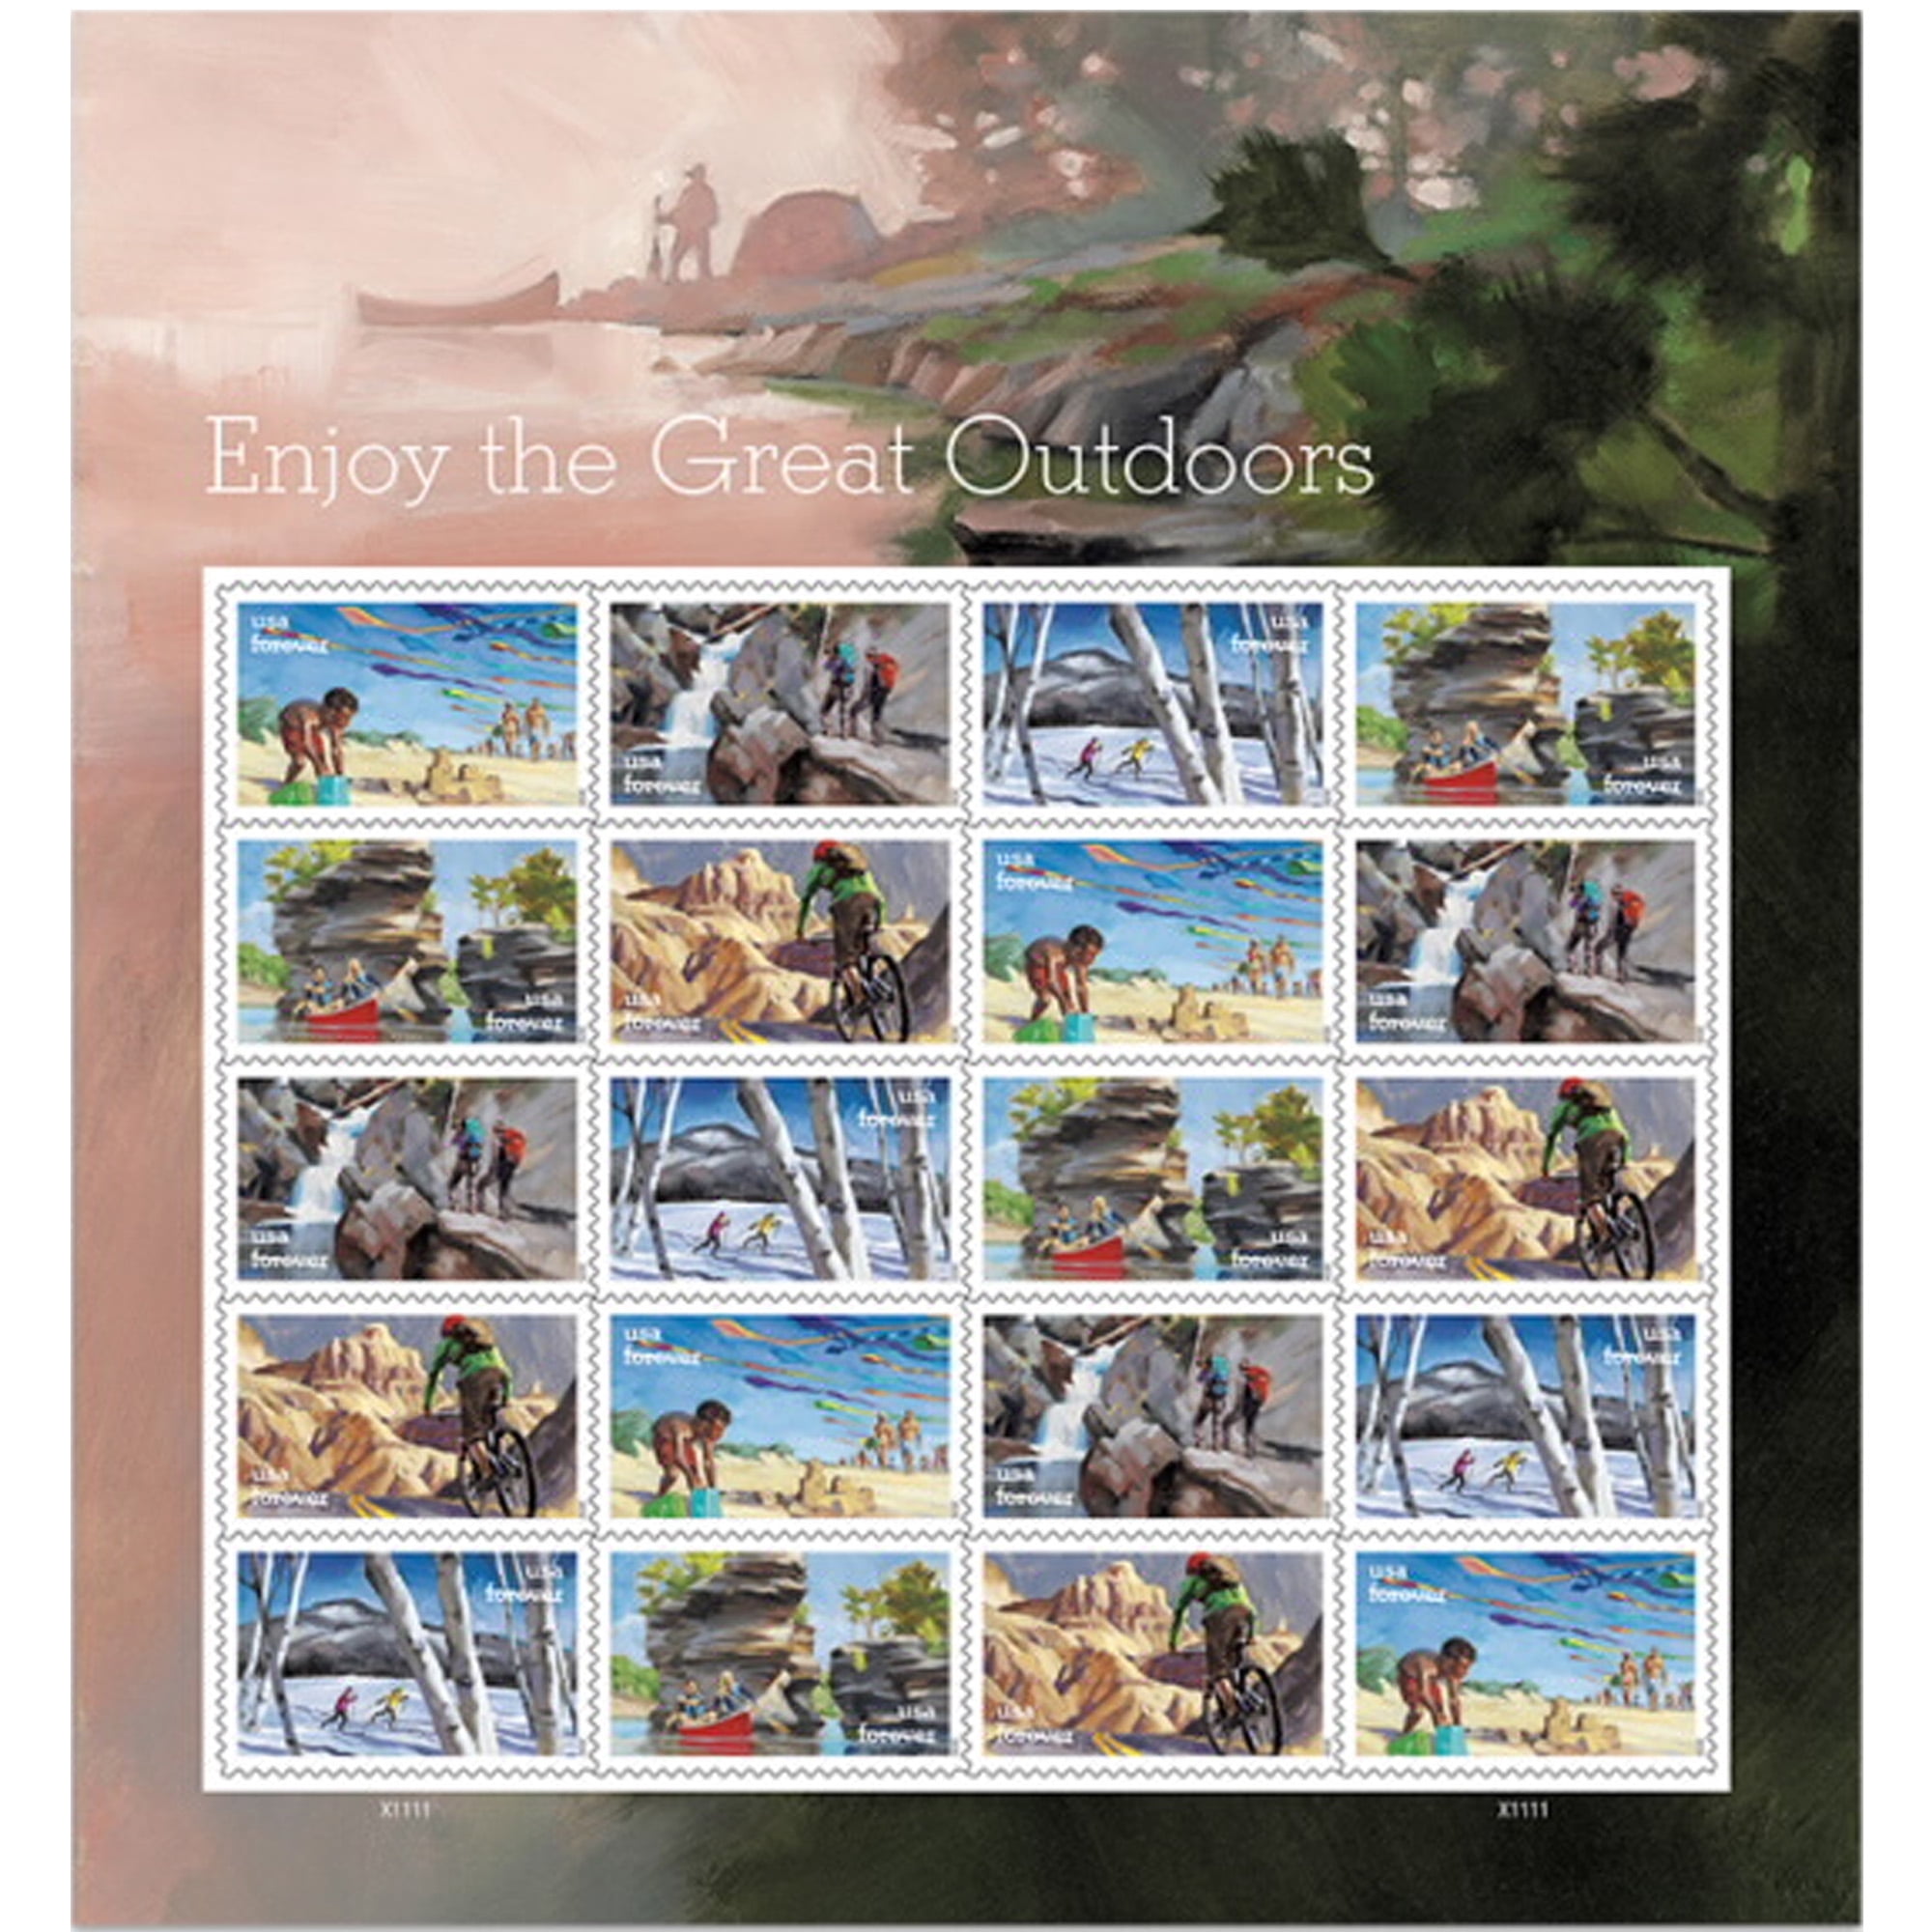 Enjoy the Great Outdoors Sheet of 20 Forever USPS First Class Postage Stamps Celebration Vacation Wedding